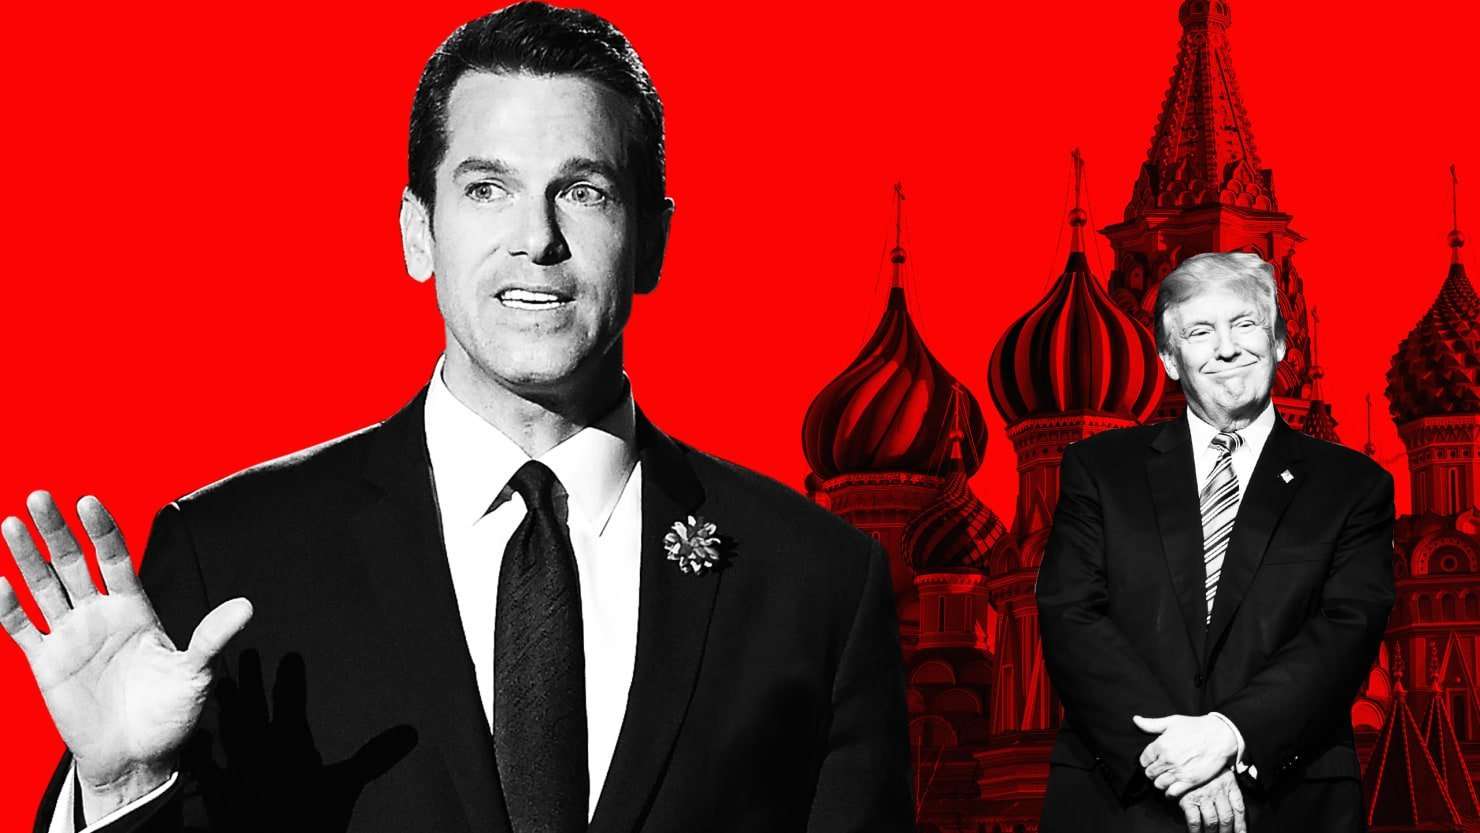 image for Miss Universe 2013 Host Thomas Roberts Confirms: Trump Stayed Overnight in Moscow